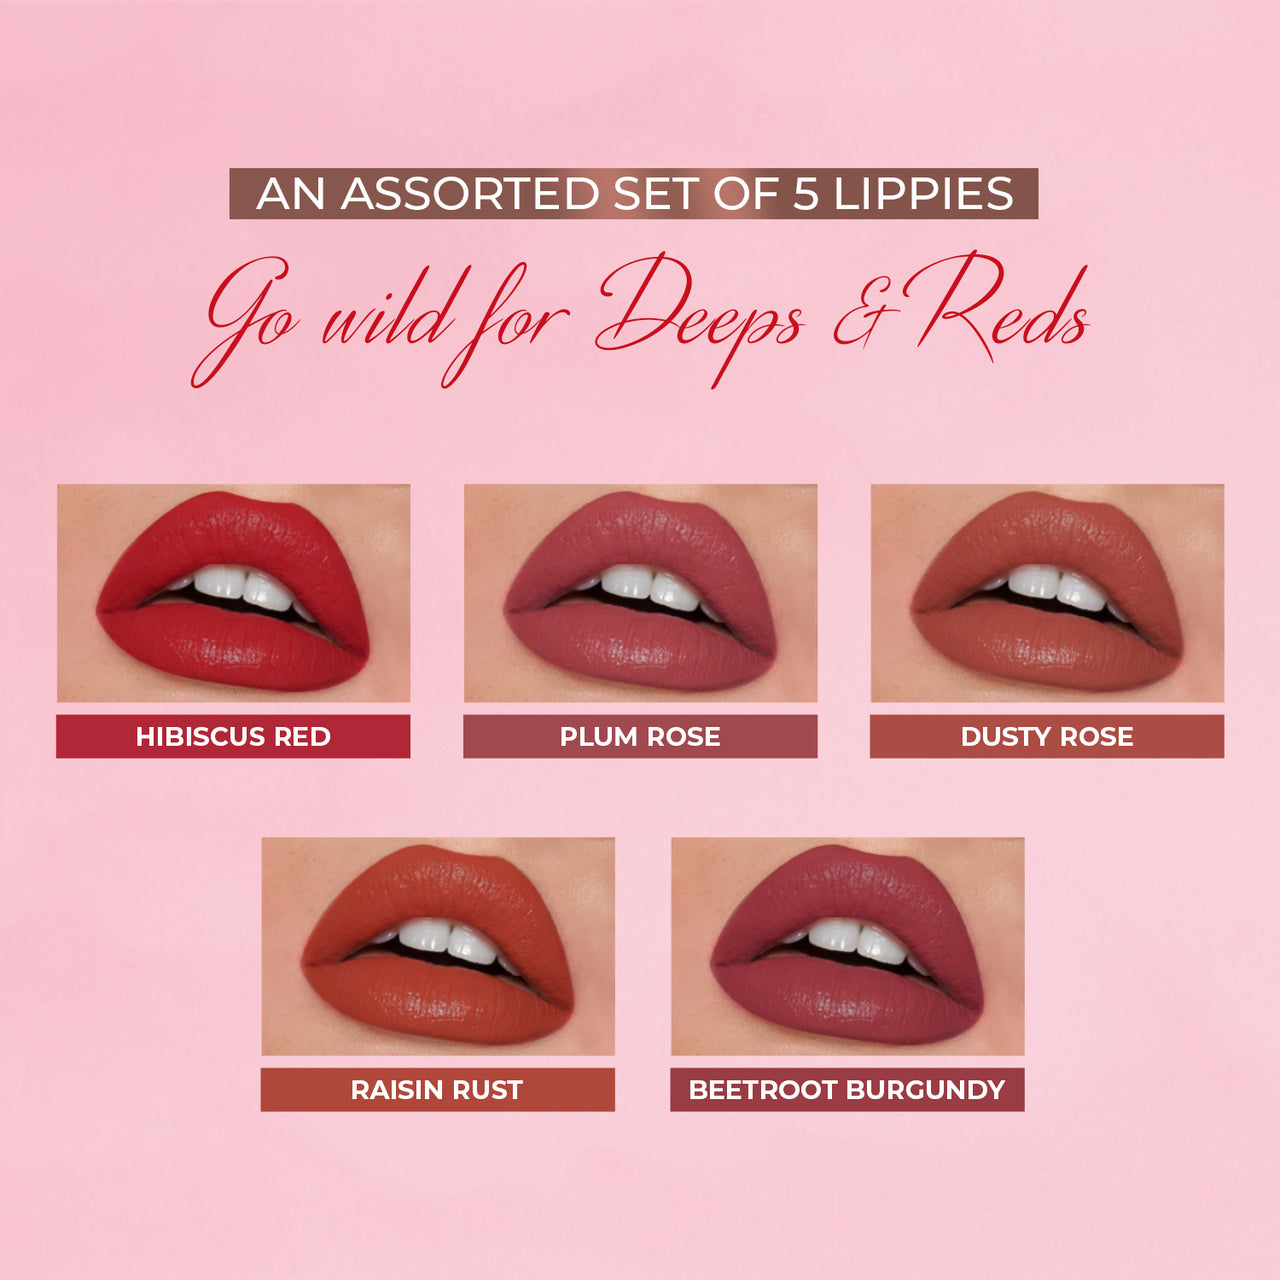 Herb-enriched Matte Liquid Lipstick Combo : Pack of 5*2